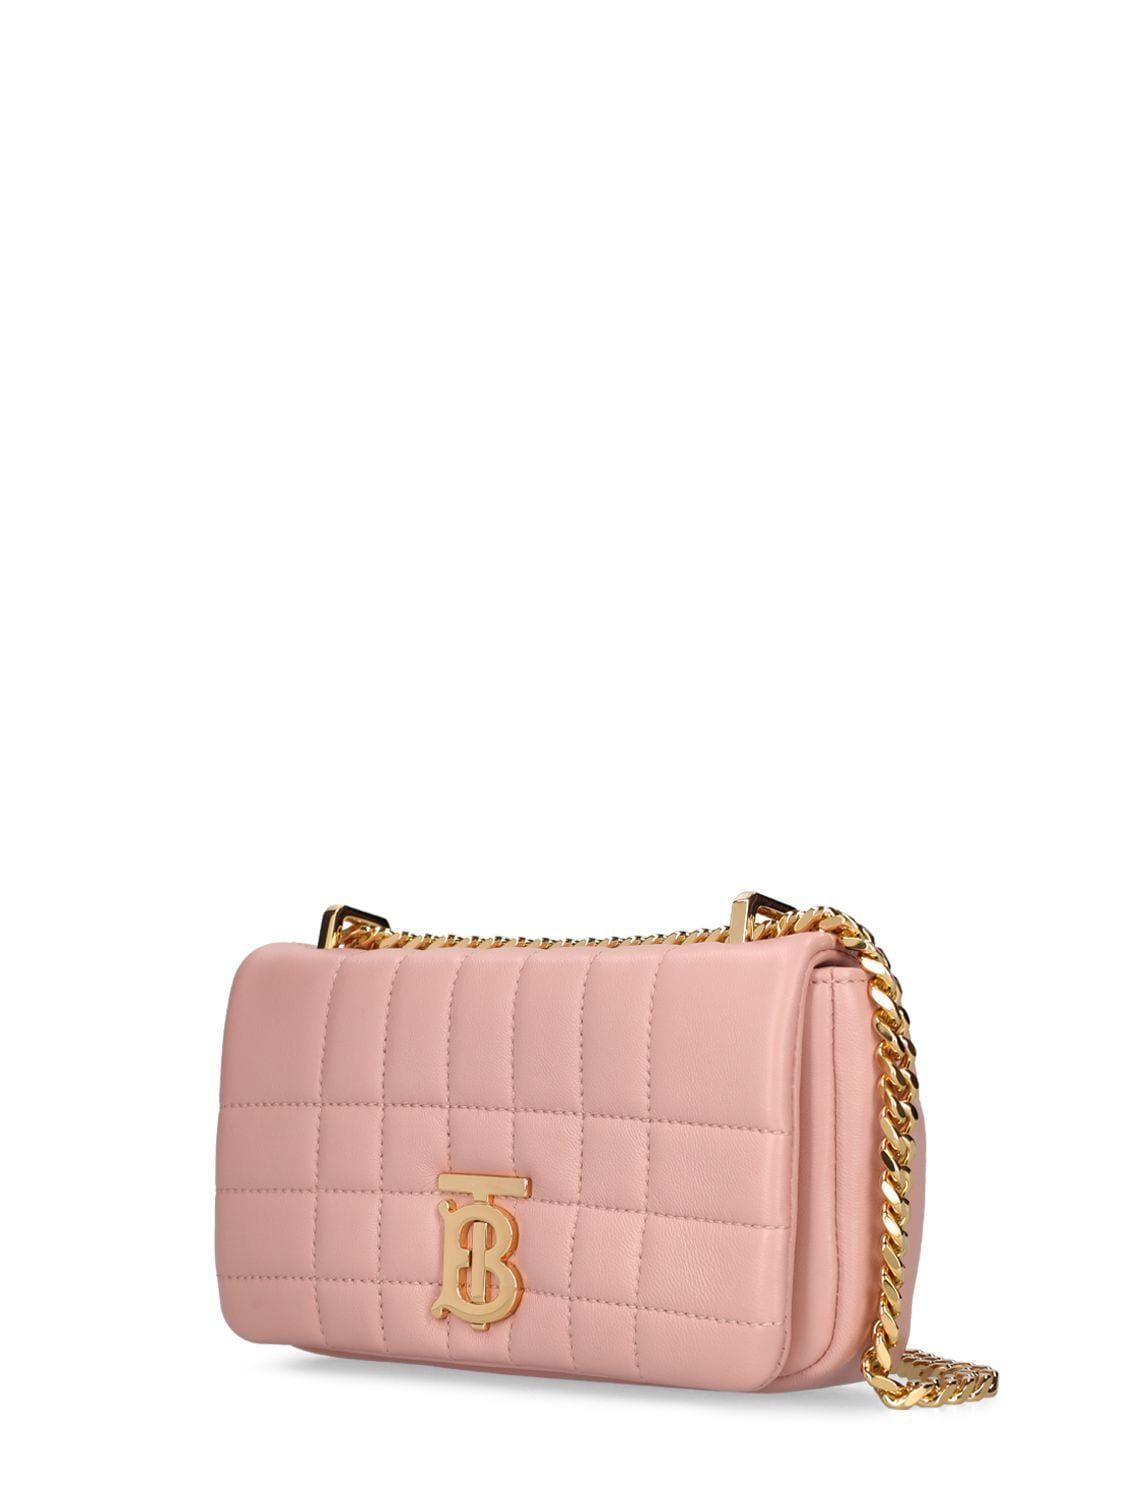 Burberry Lola Mini Quilted Leather Shoulder Bag